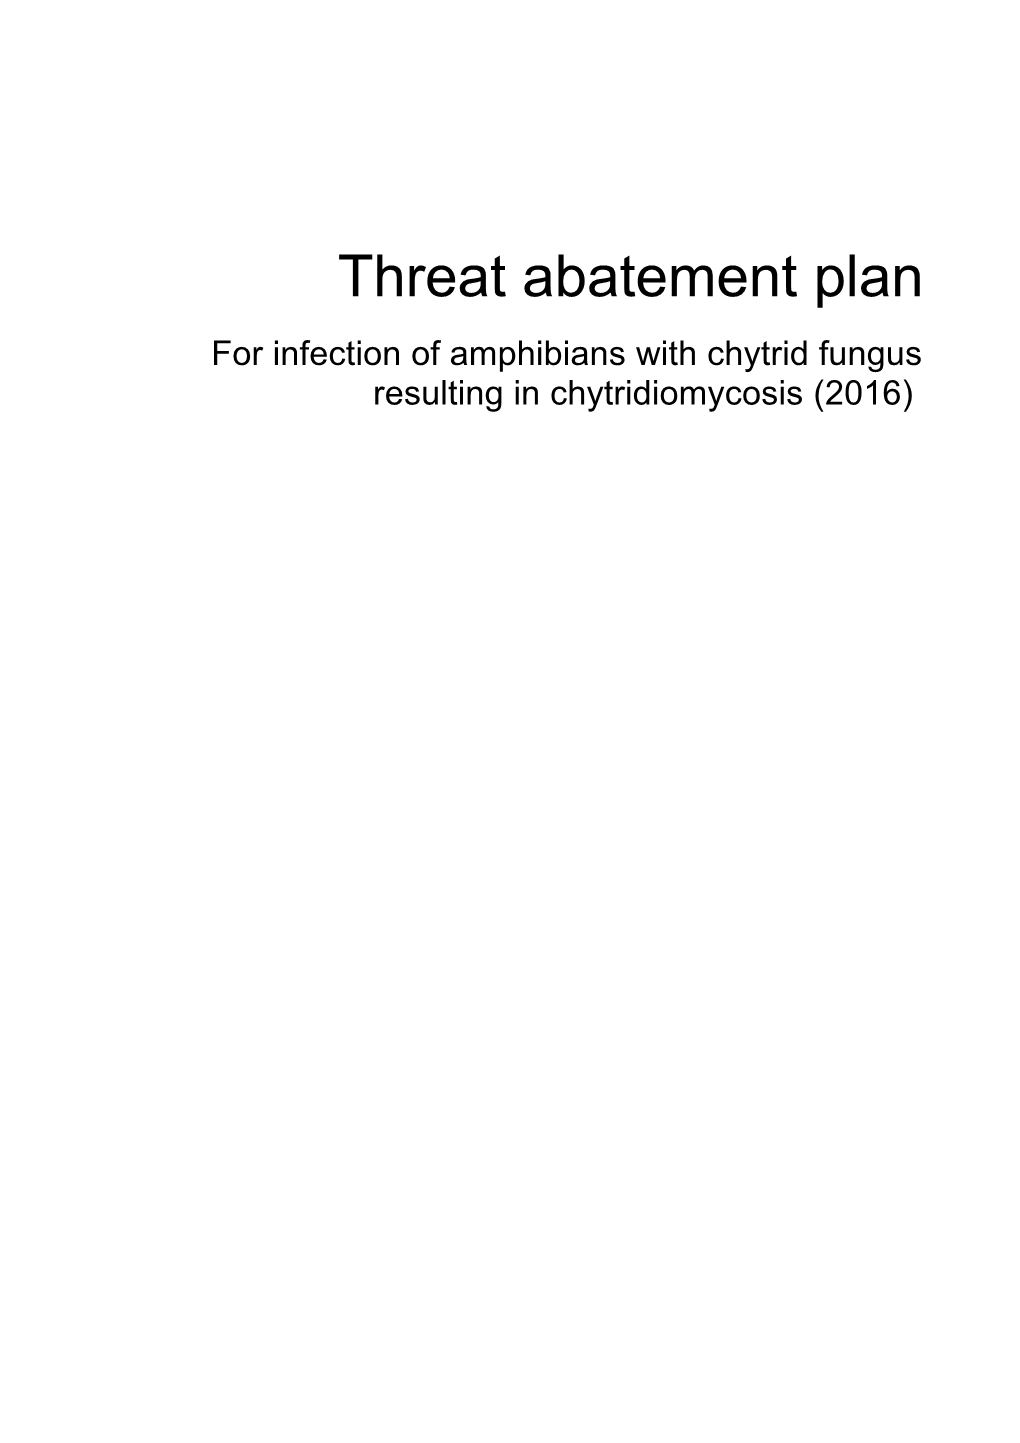 Threat Abatement Plan for Infection of Amphibians with Chytrid Fungus Resulting In